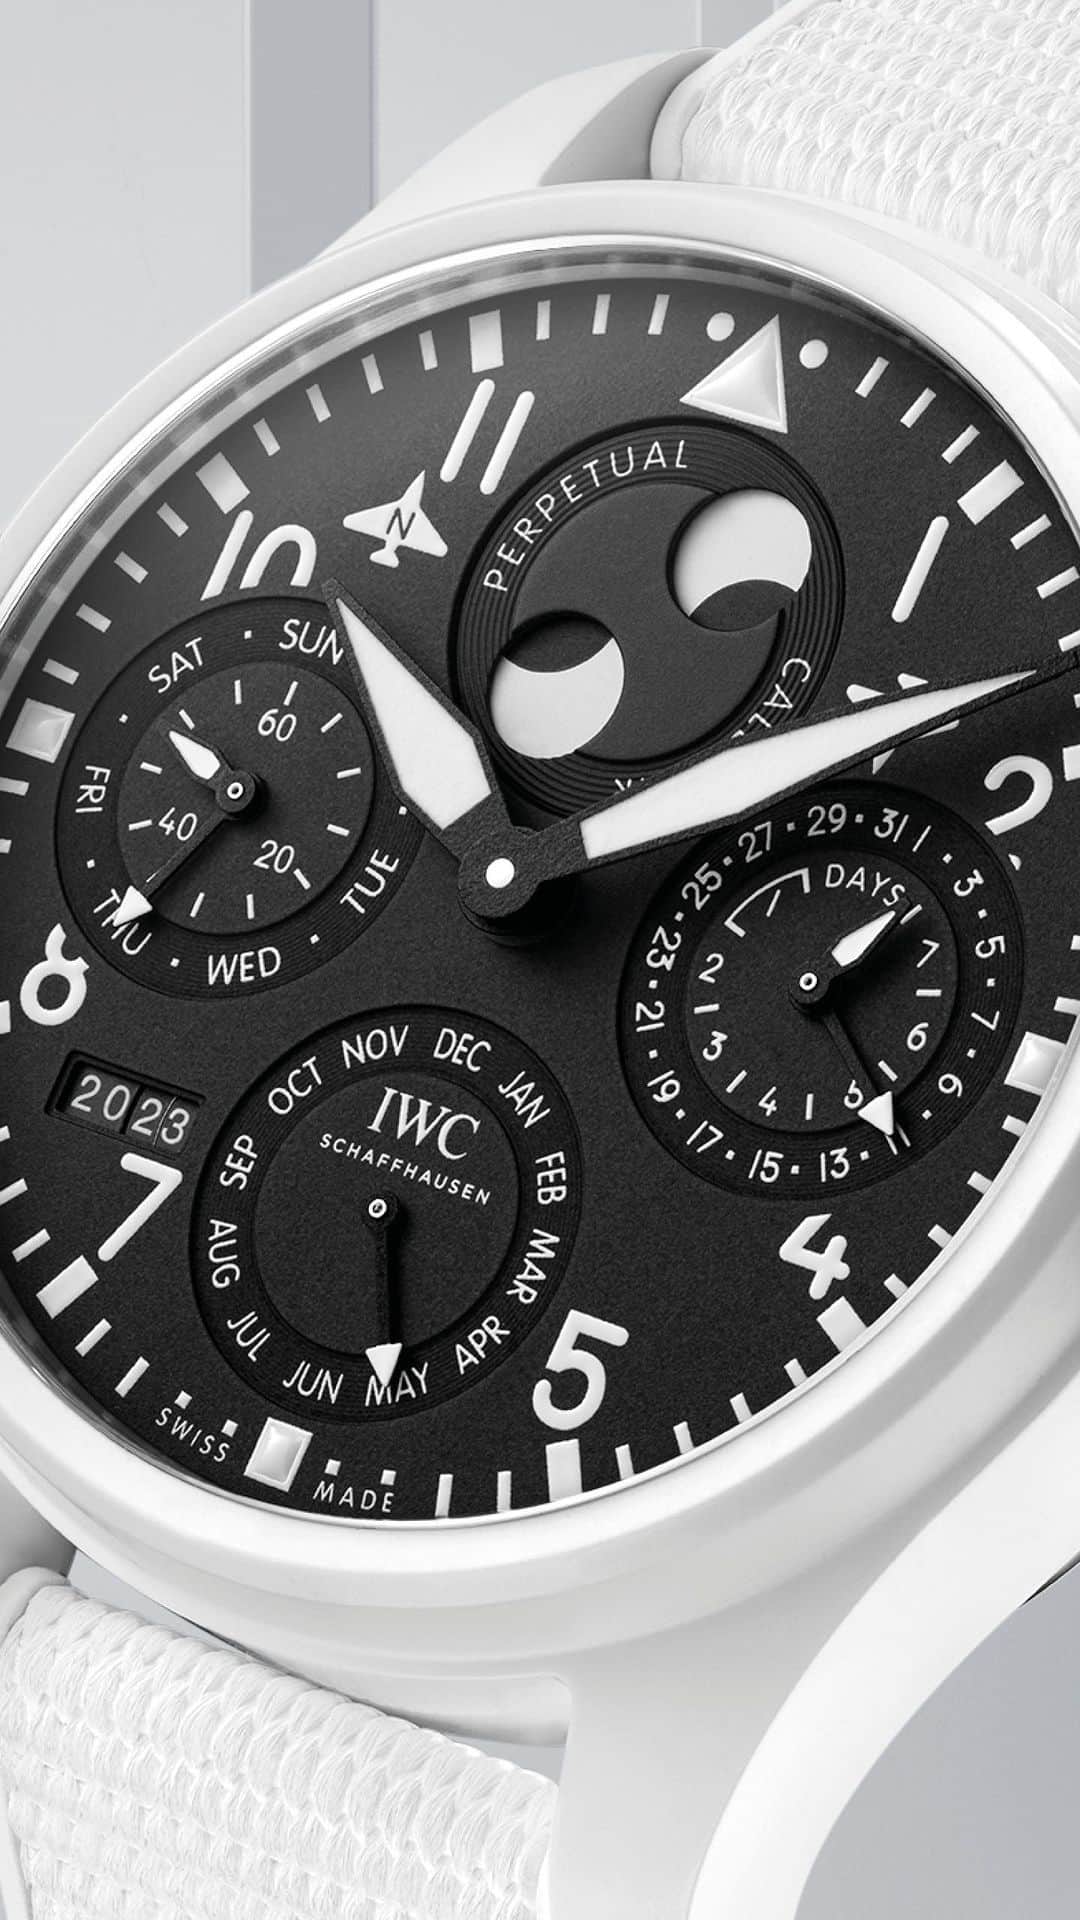 IWCのインスタグラム：「Developed by Kurt Klaus in the 1980s the perpetual calendar module is mechanically programmed to recognize the different month lengths and the leap years. The patented double moon phase display shows the moon as seen from the northern and southern hemispheres and thanks to a special reductionist gear train, it is so precise that it will only deviate by one day after 577.5 years. The calendar module is driven via a single nightly switching impulse by the IWC-manufactured 52615 caliber movement with a power reserve of 7 days.   #IWCpilot | #IWCtopgun | #IWClaketahoe  🔗Link in bio  ℹ Black dial Ceramic case, 46.5mm IWC-manufactured 52615 Calibre See-through sapphire glass back Ref. IW503008」